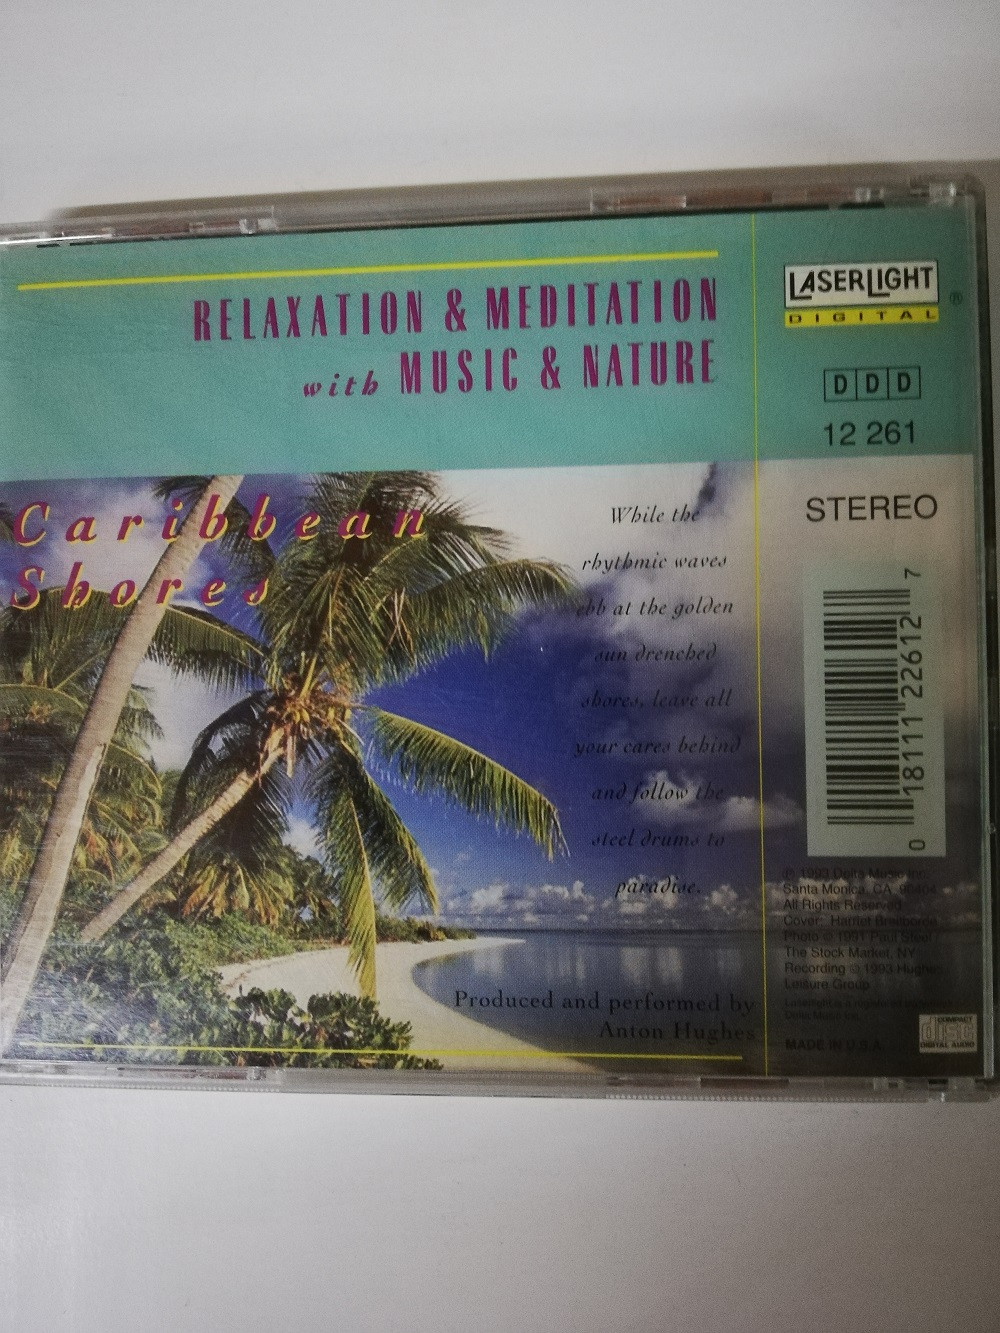 Imagen CD RELAXATION & MEDITATION WITH MUSIC & NATURE 2